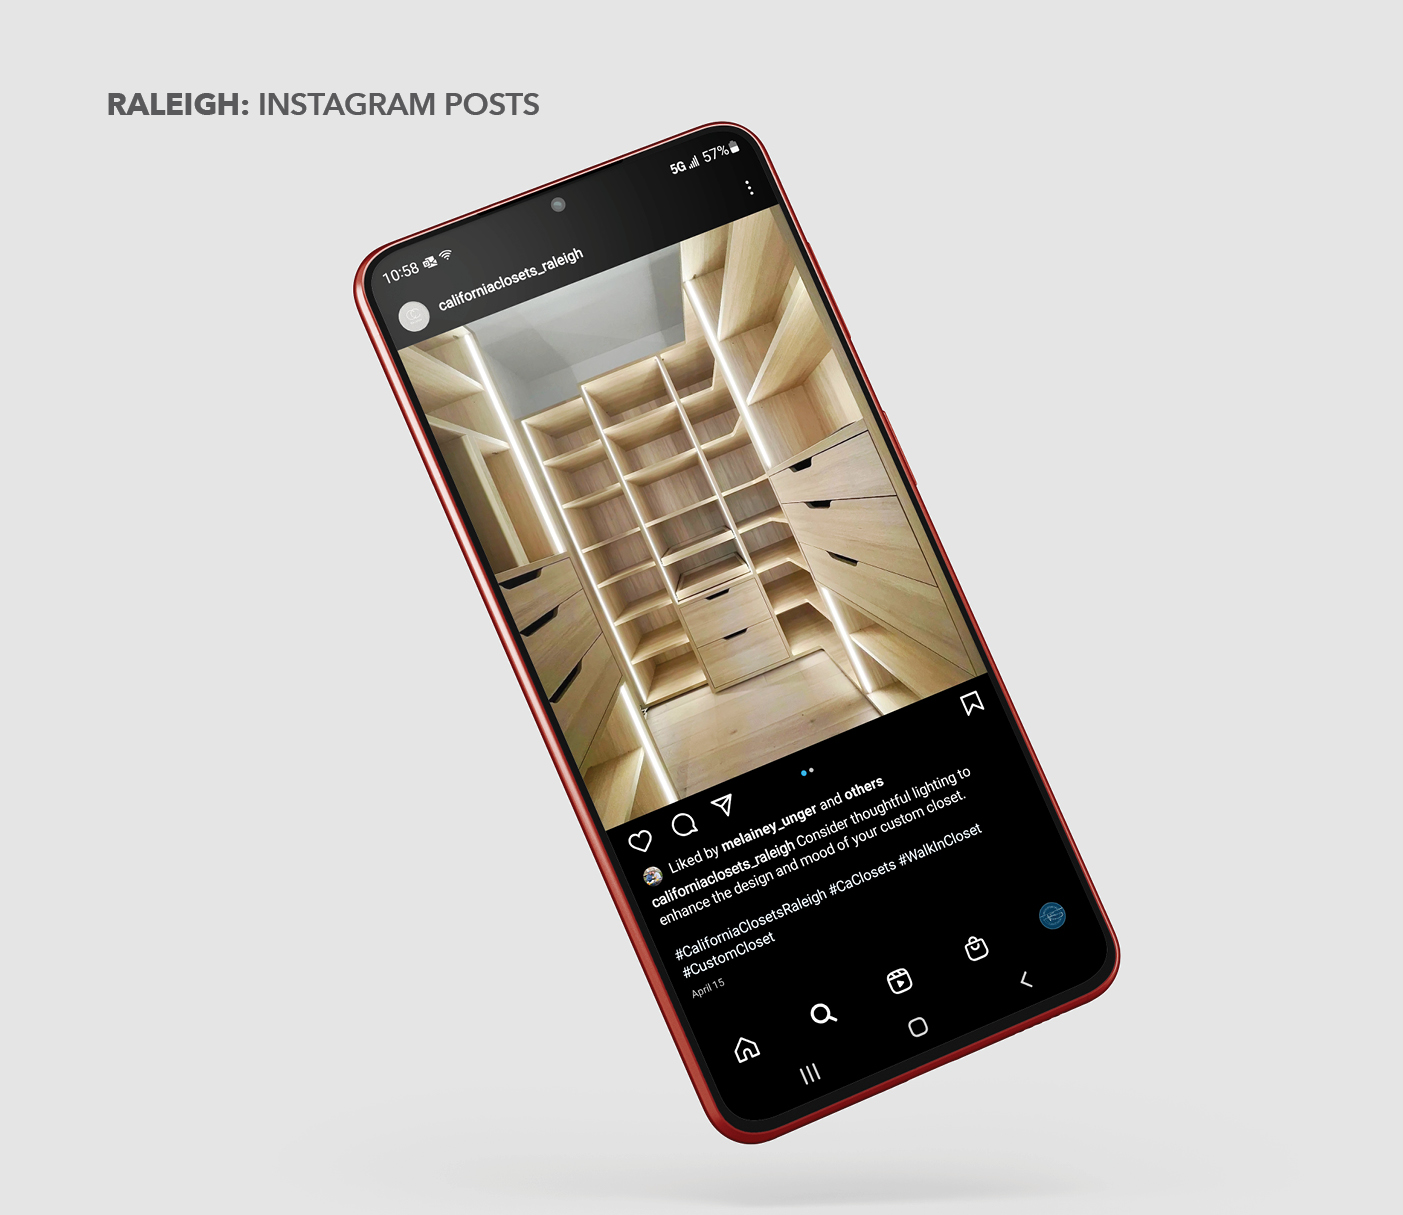 Mobile phone with image of a California Closets Raleigh Instagram post